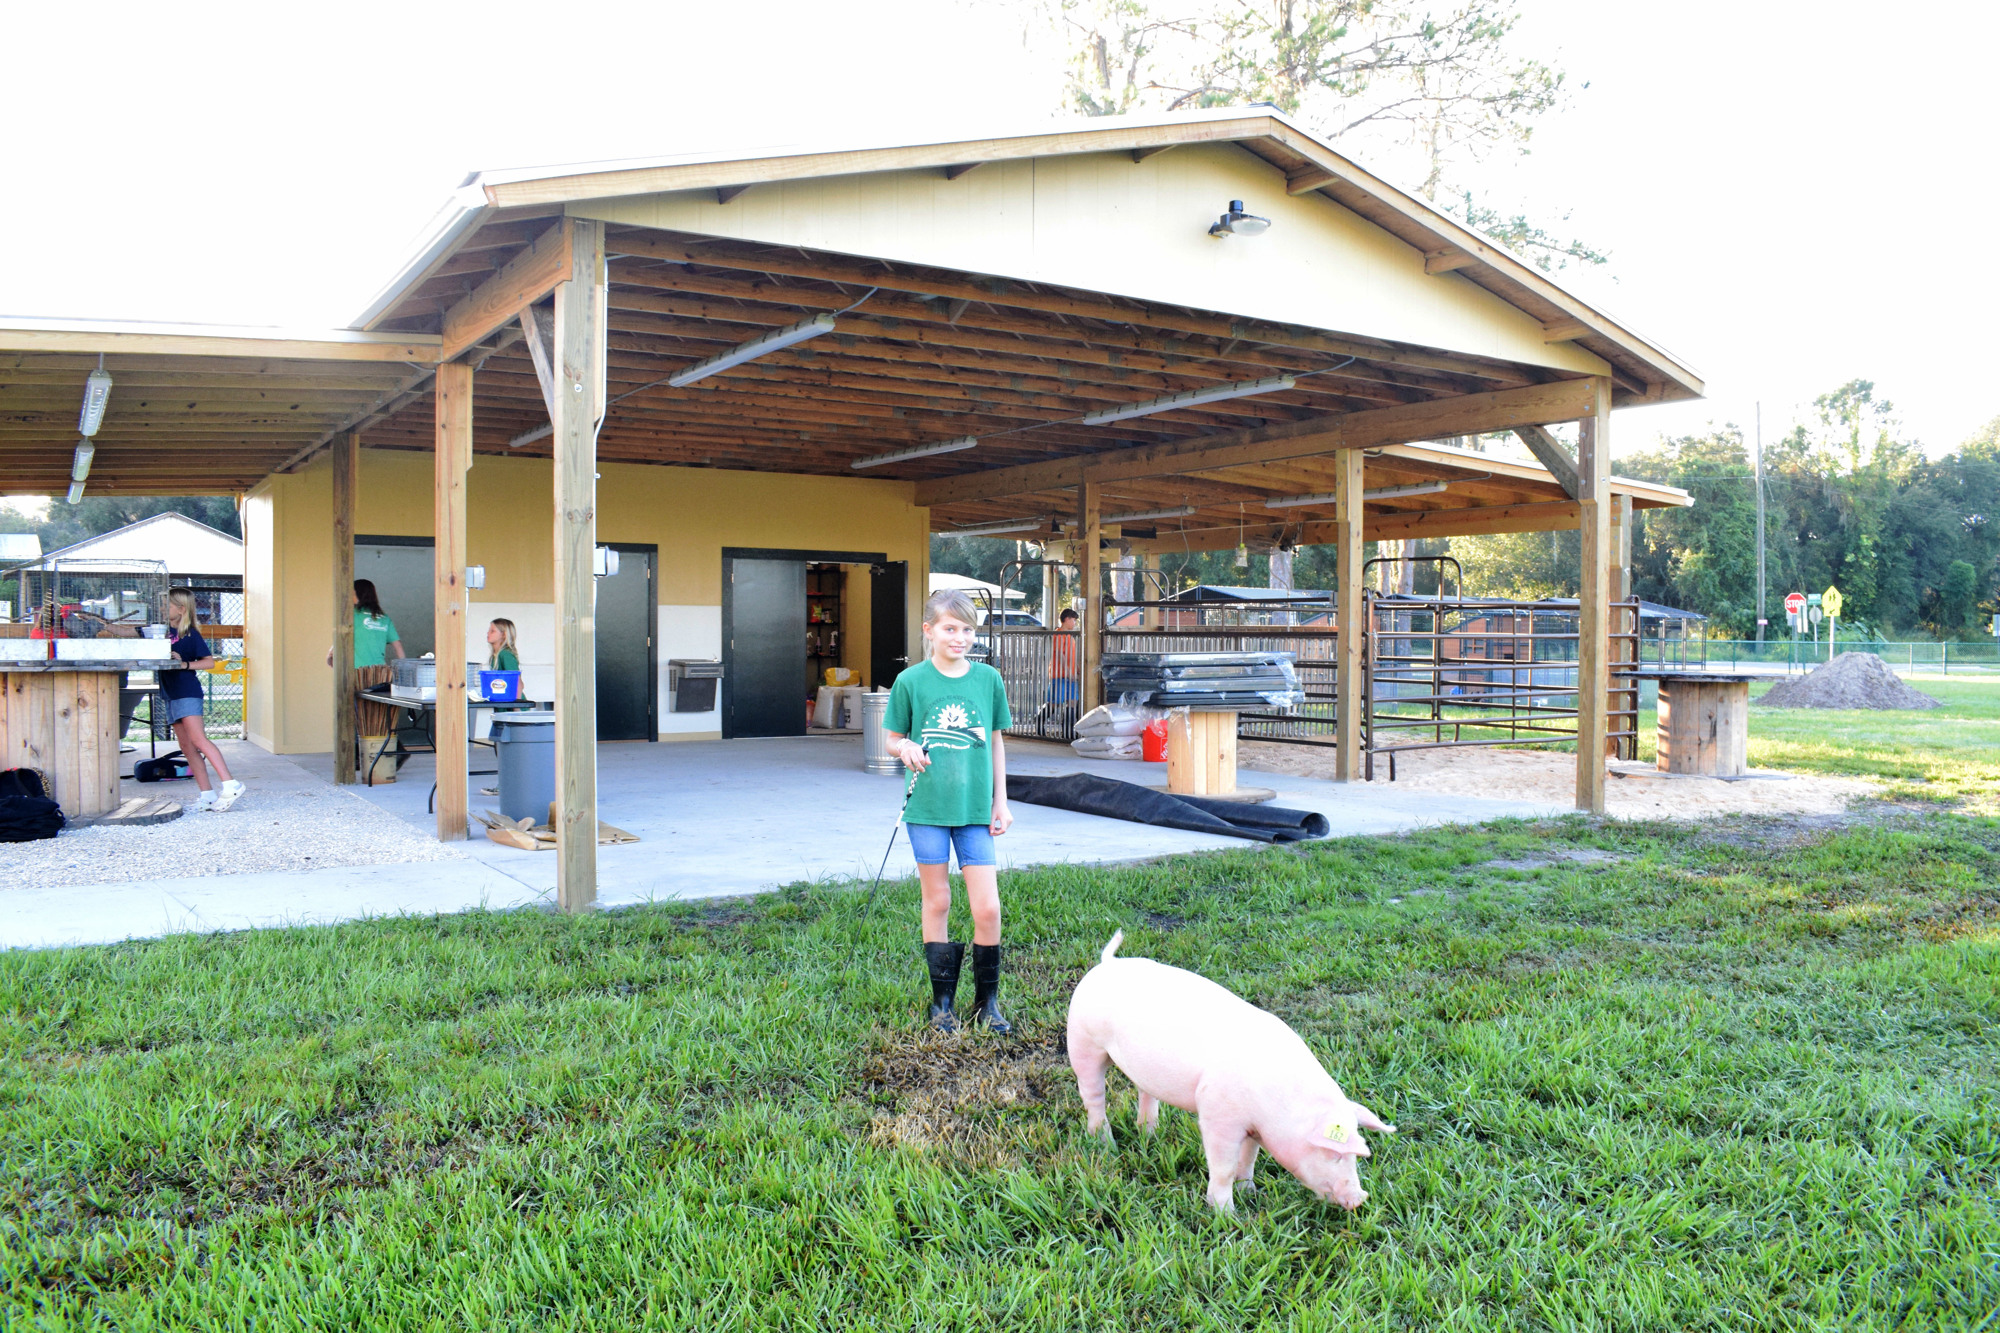 All Myakka City Elementary School students will be a part of the school's new agriculture science program, which includes teaching students about animals and plants.